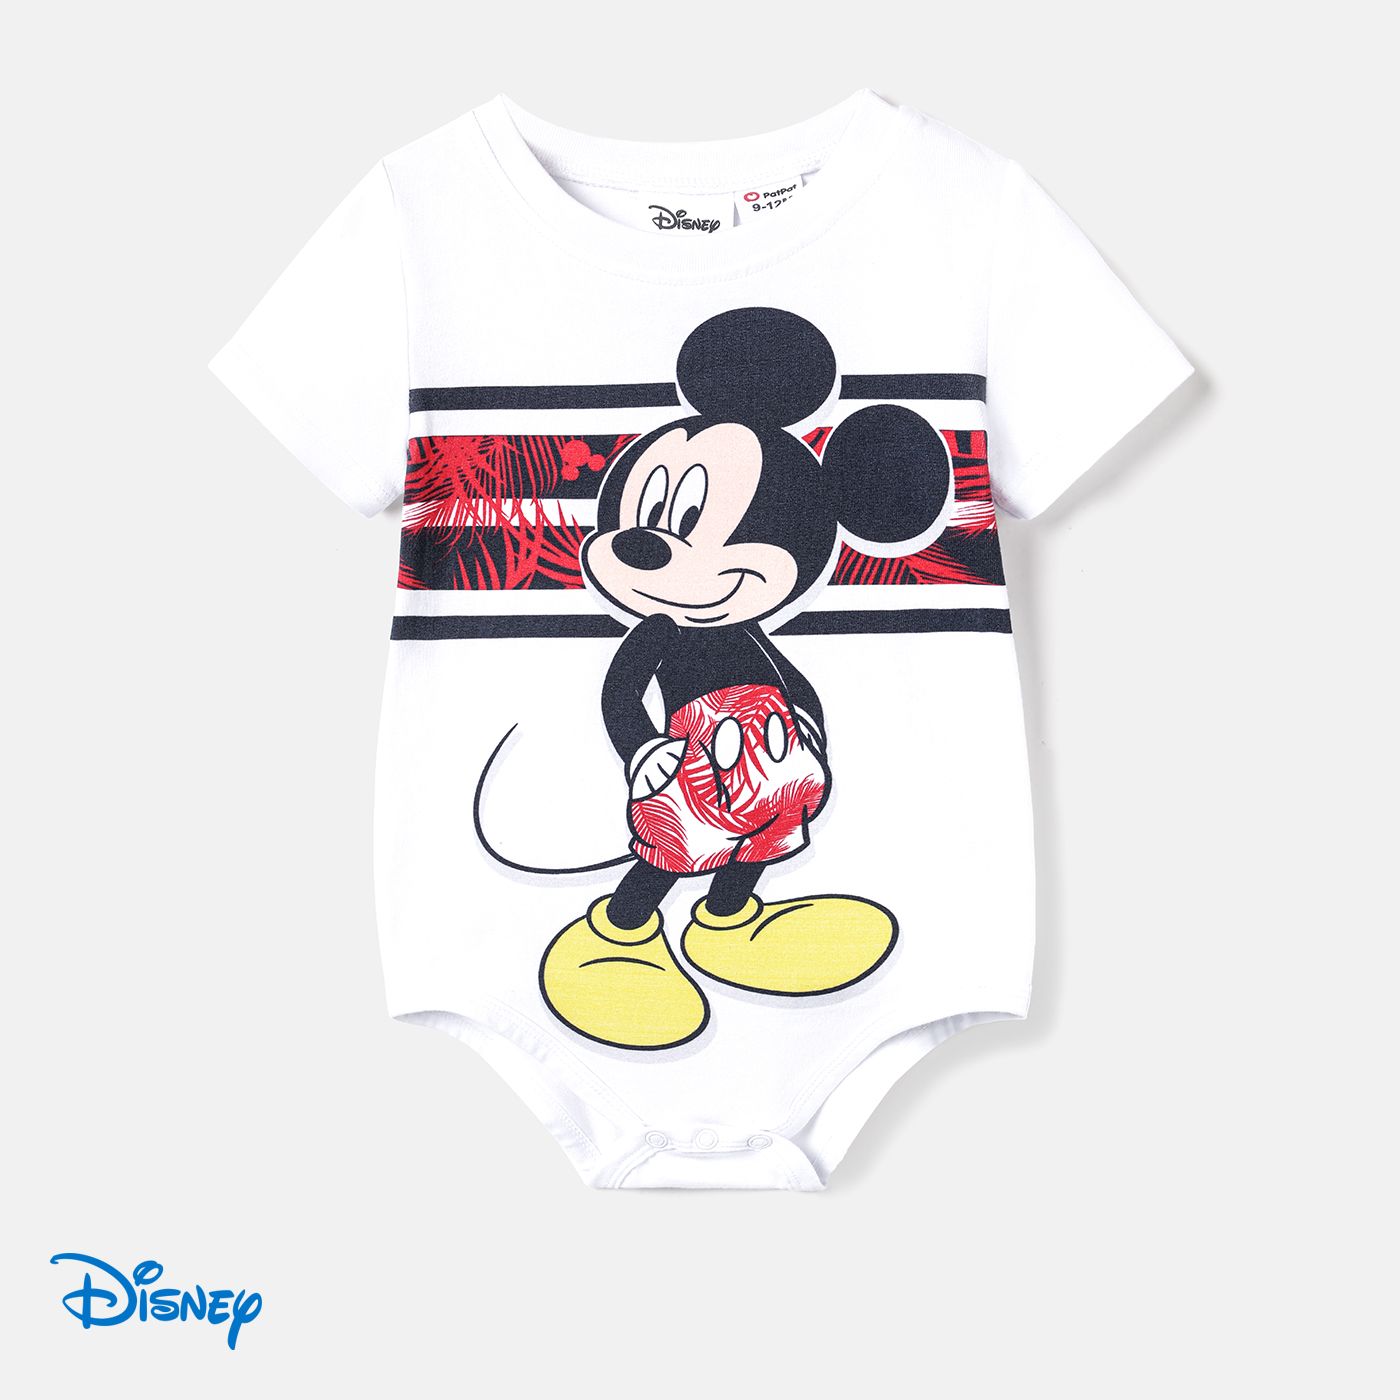 

Disney Mickey and Friends Family Matching Plant Print Splice Ruffled Cami Dresses and Striped Cotton Short-sleeve T-shirts Sets